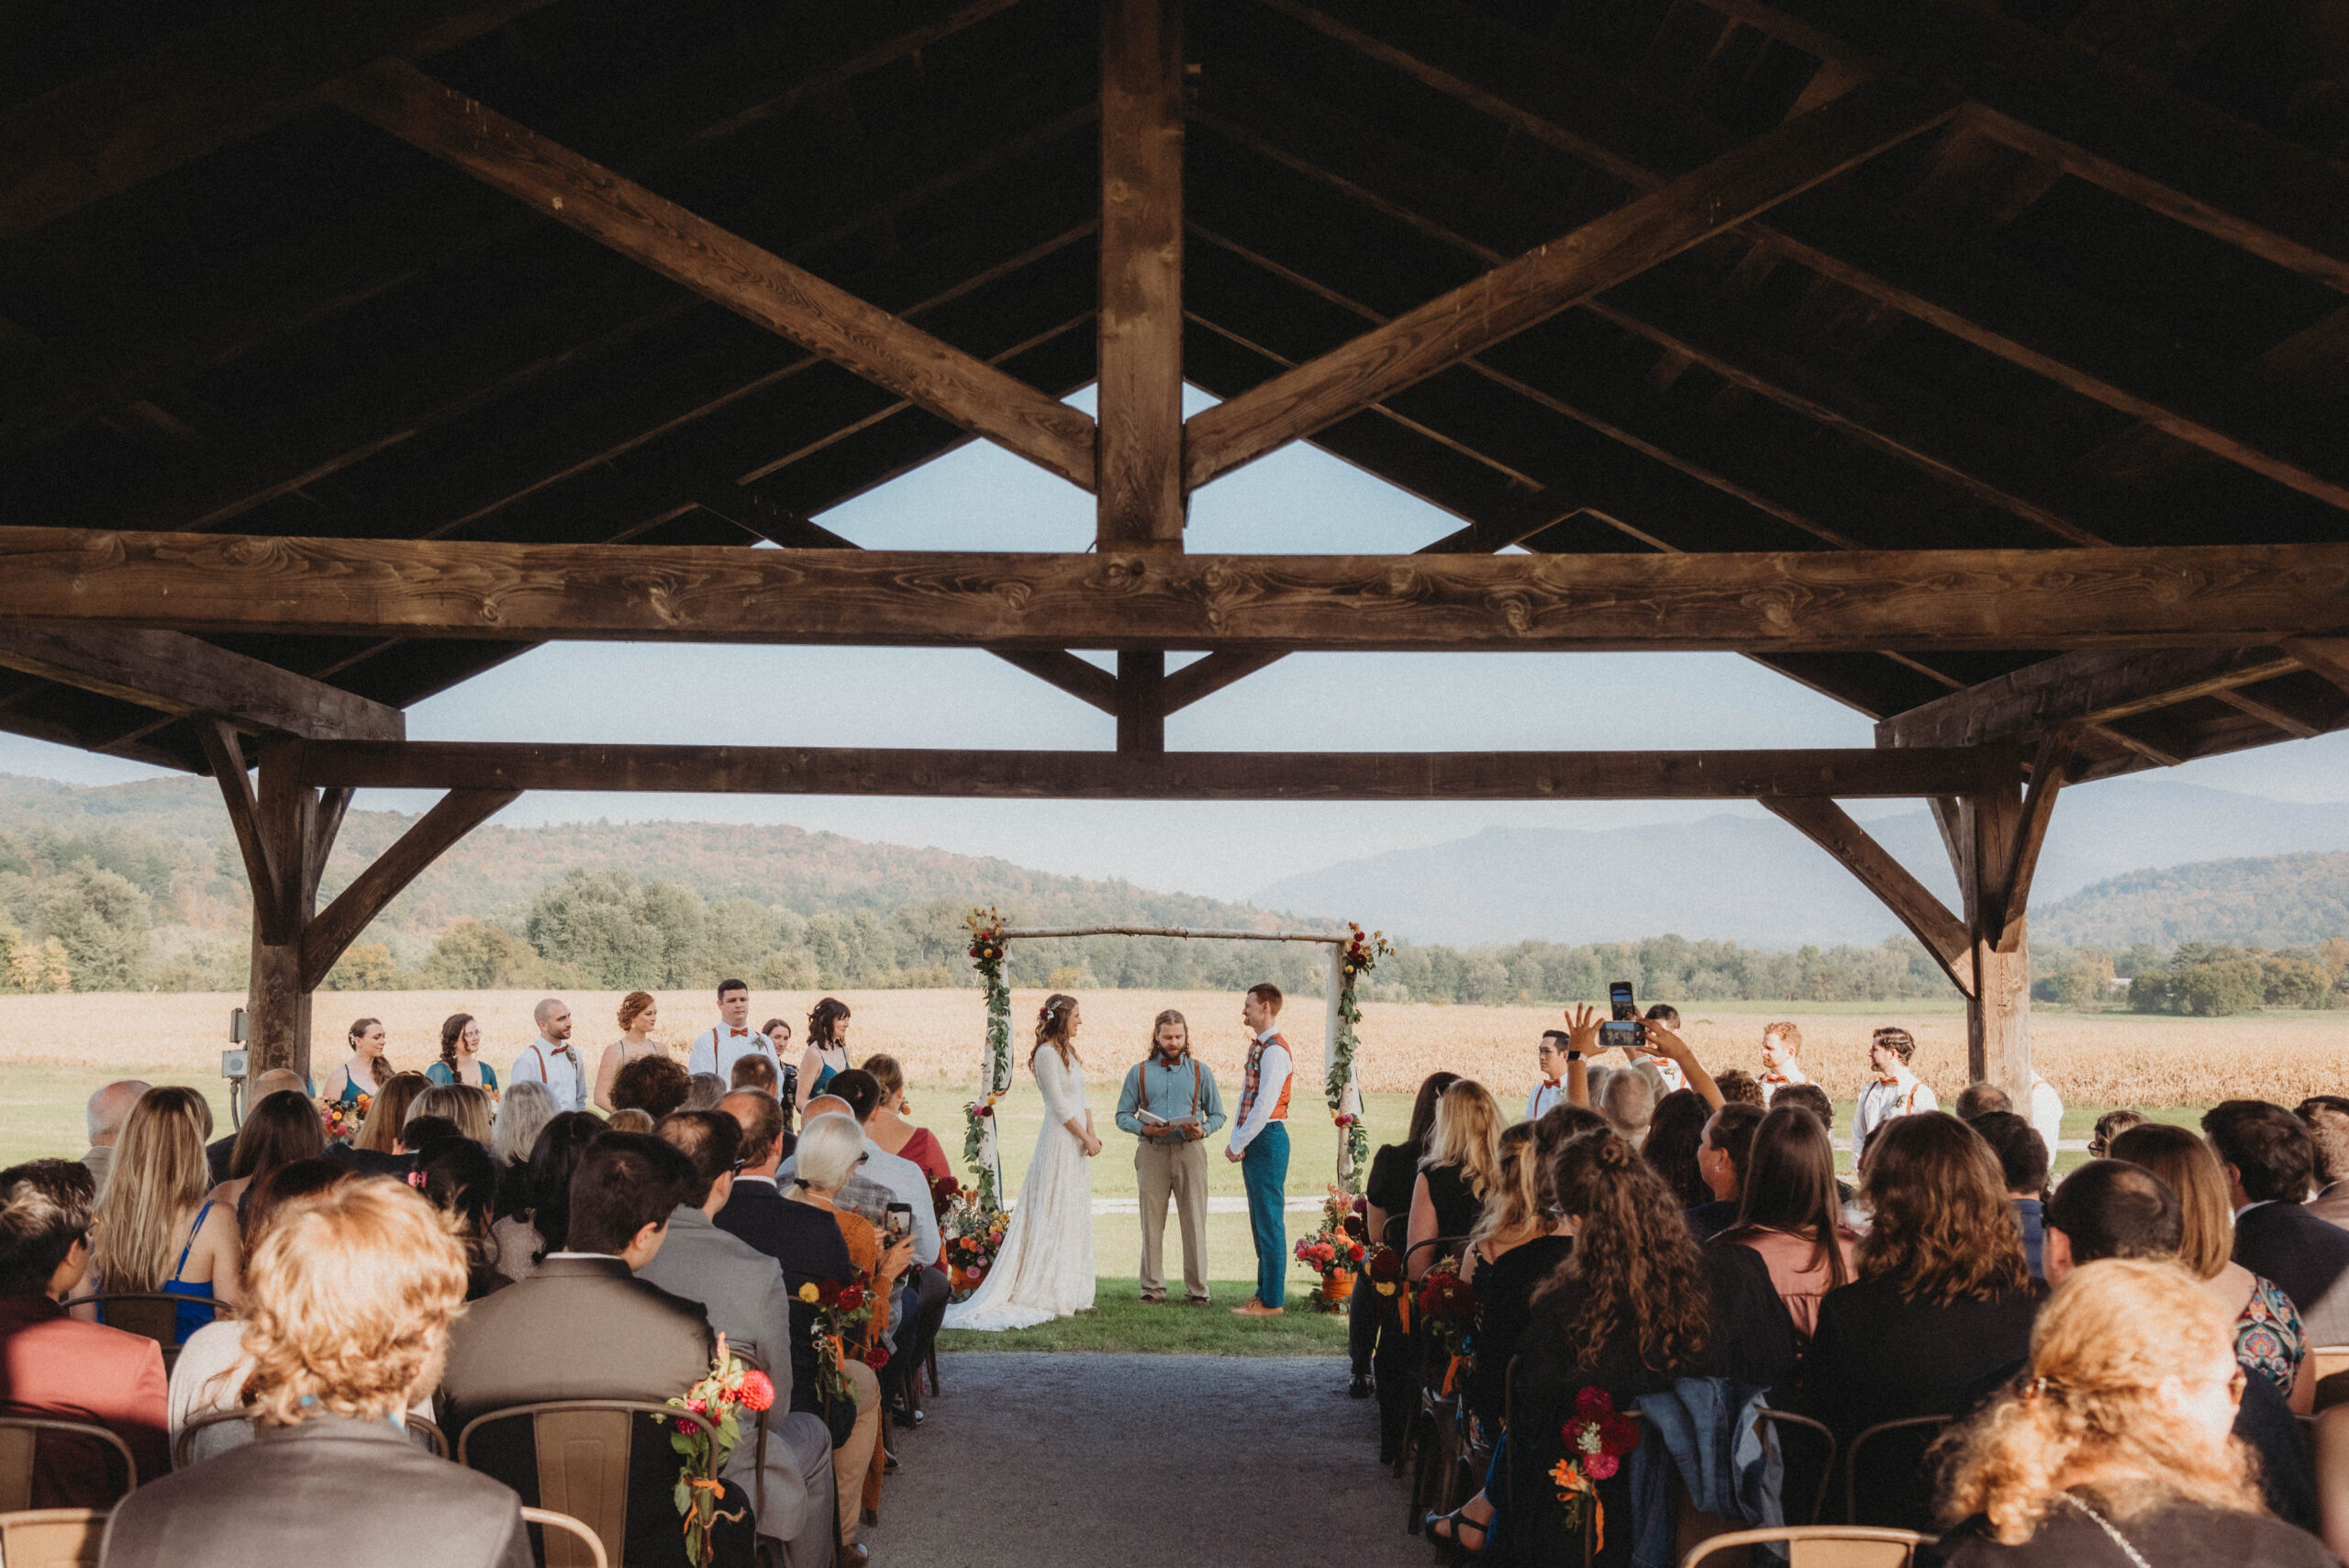 Emily and Sean standing together at their wedding arbor underneath the post and beam pavilion. Vermont mountains and a cornfield are in the background.